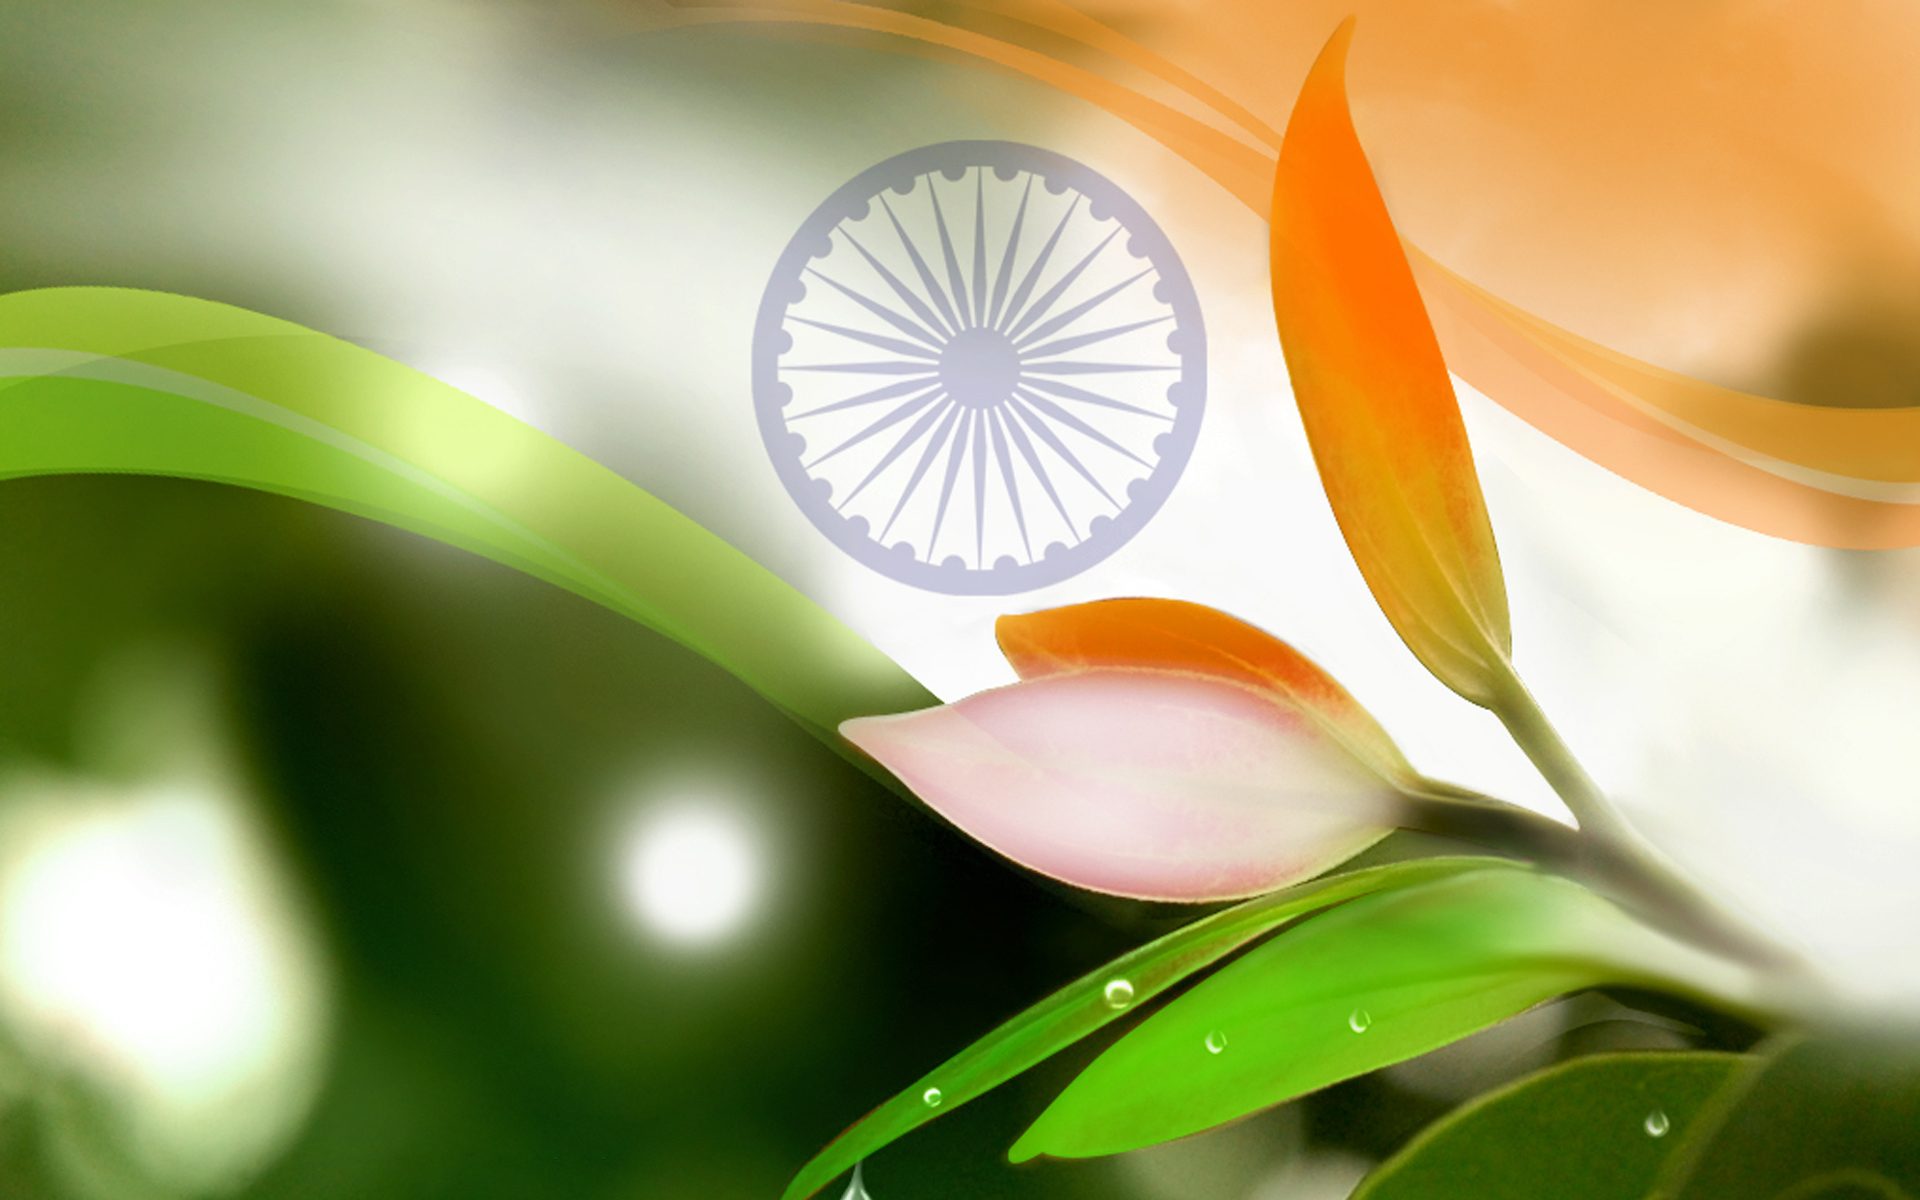 Happy Independence Day HD Wallpapers for India 2015